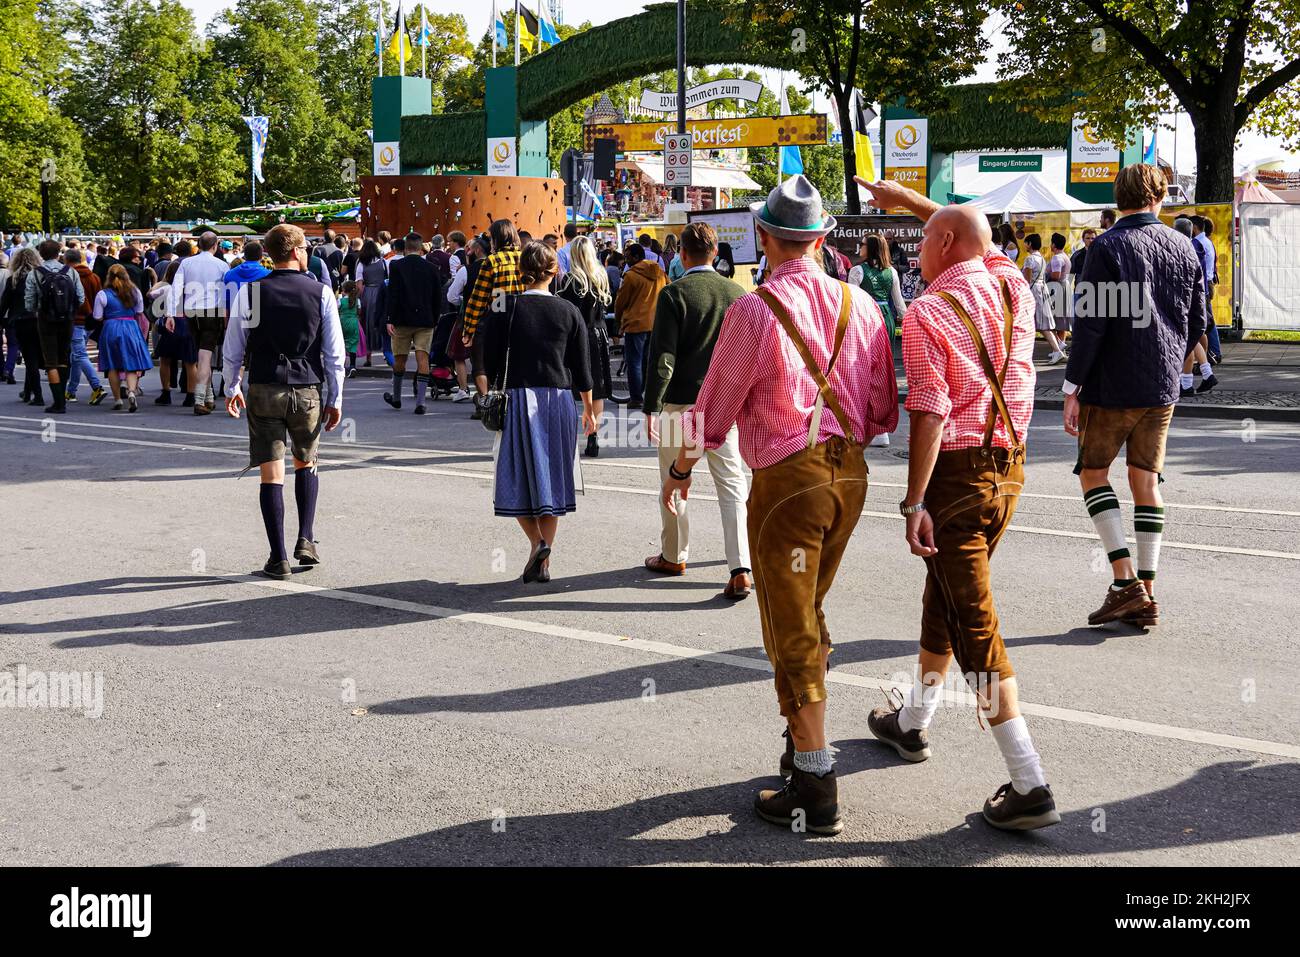 People on their way to the main entrance of the Oktoberfest festival grounds at Theresienwiese. Stock Photo